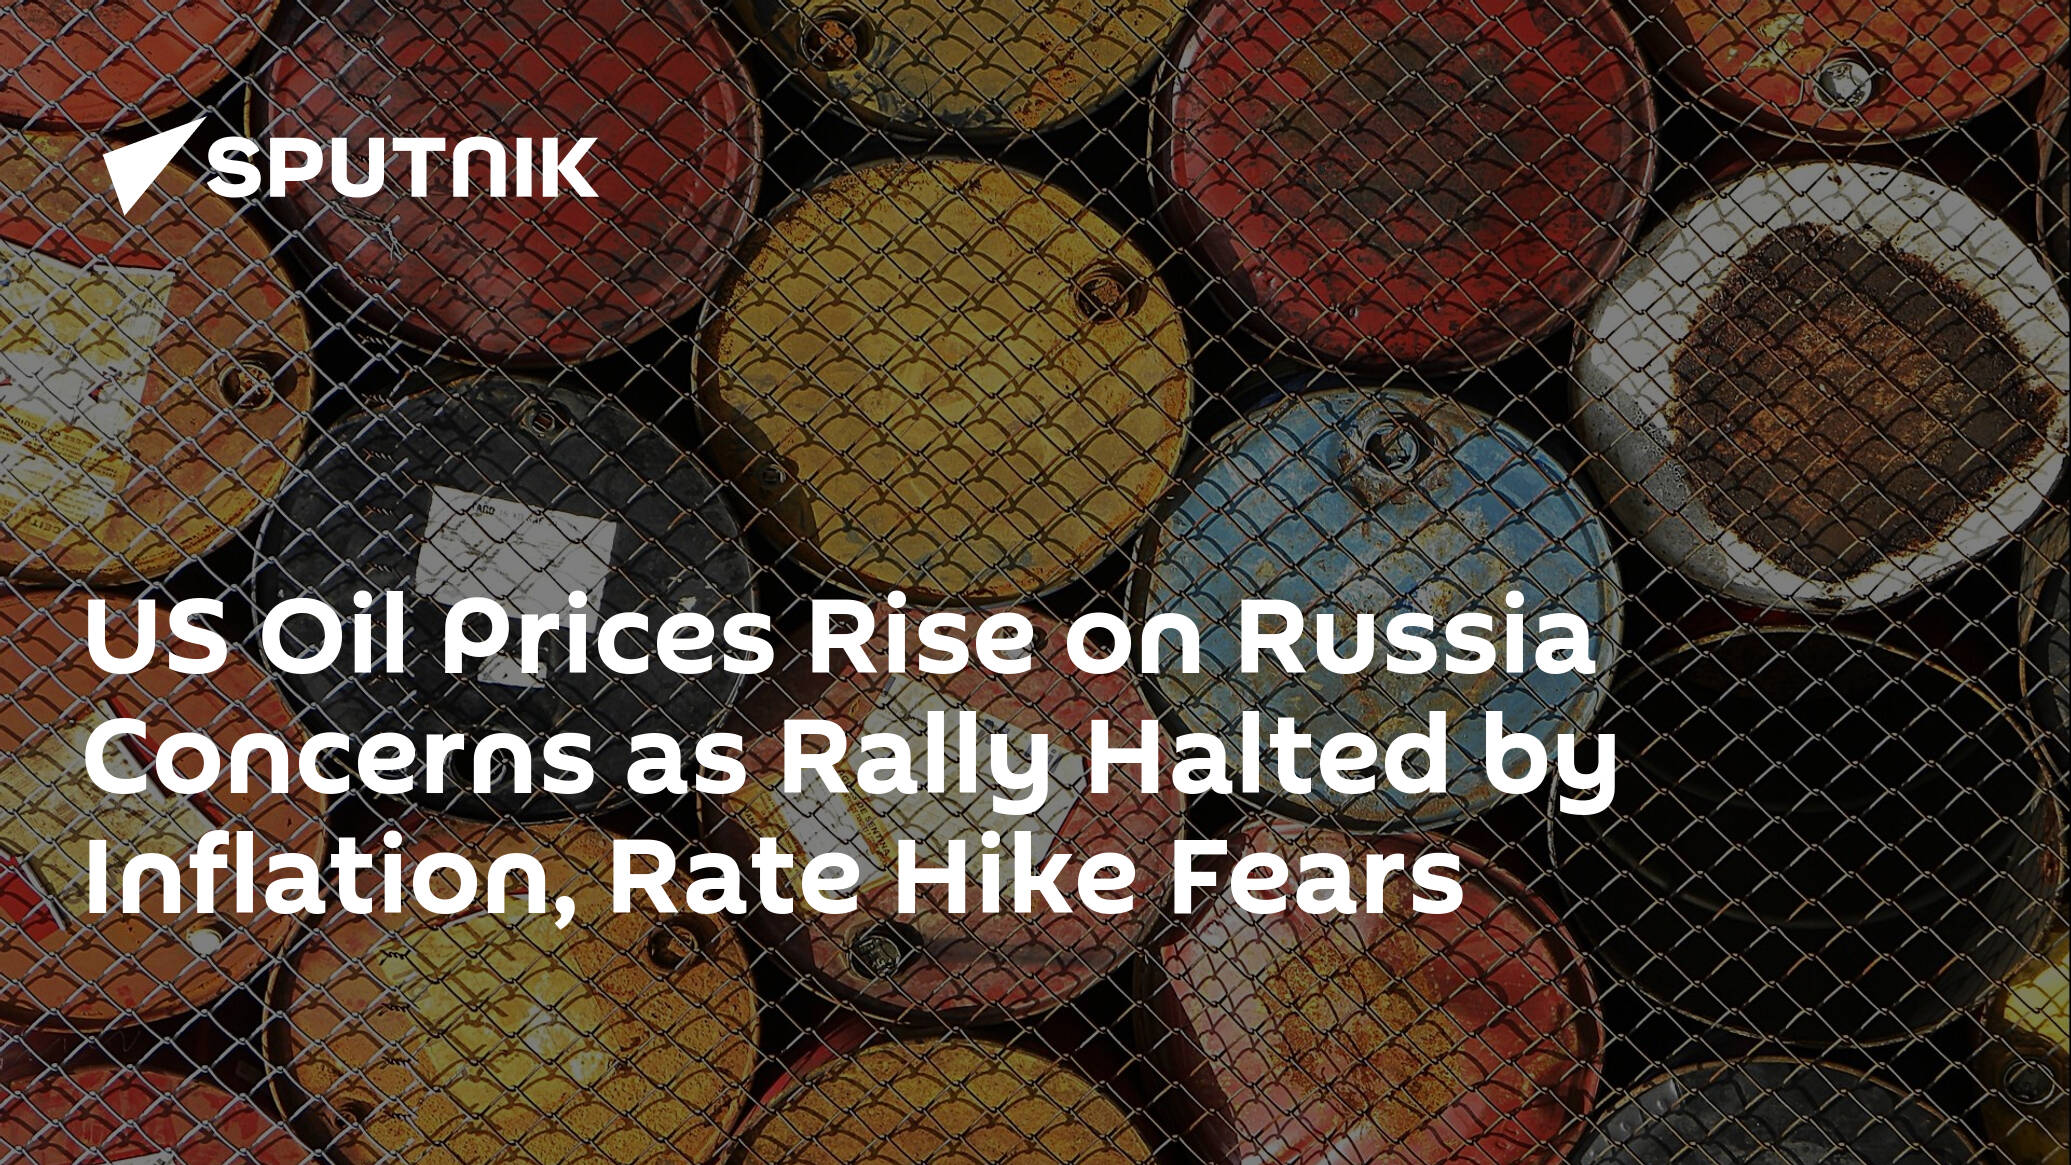 US Oil Prices Rise on Russia Concerns as Rally Halted by Inflation, Rate Hike Fears